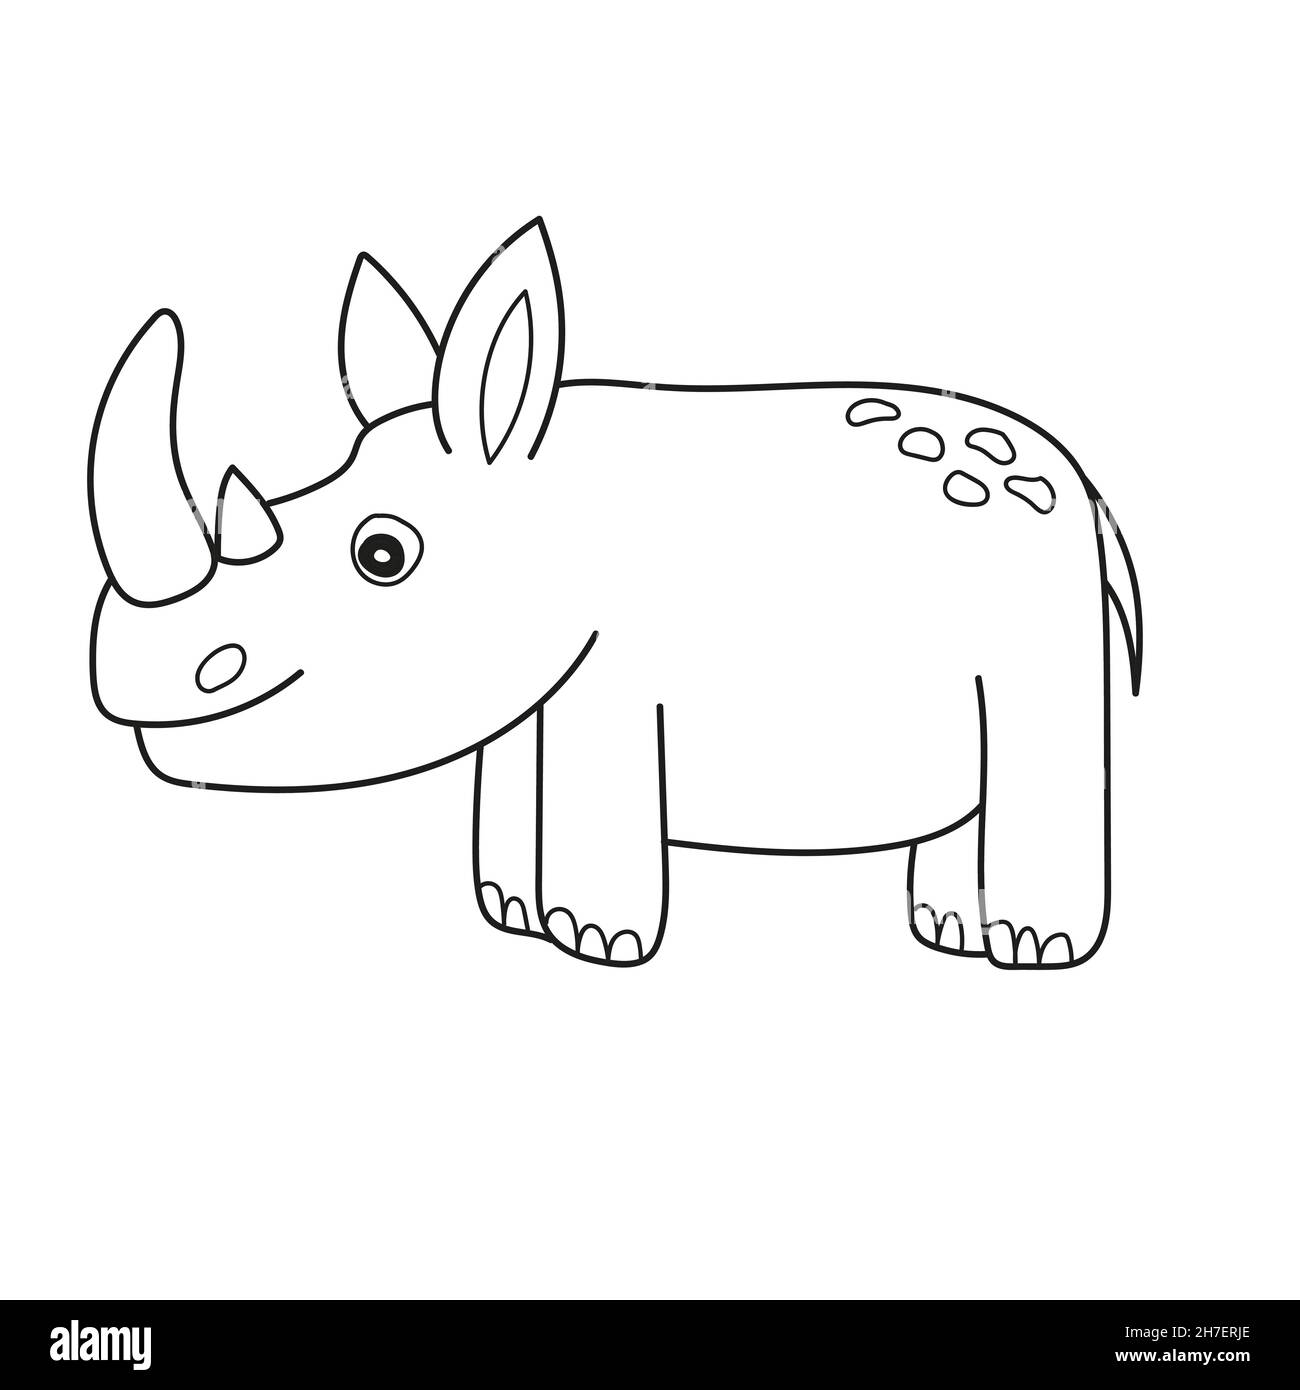 Simple coloring page. Cute rhinoceros. Vector illustration of cute cartoon rhinoceros character for children, coloring and scrap book Stock Vector